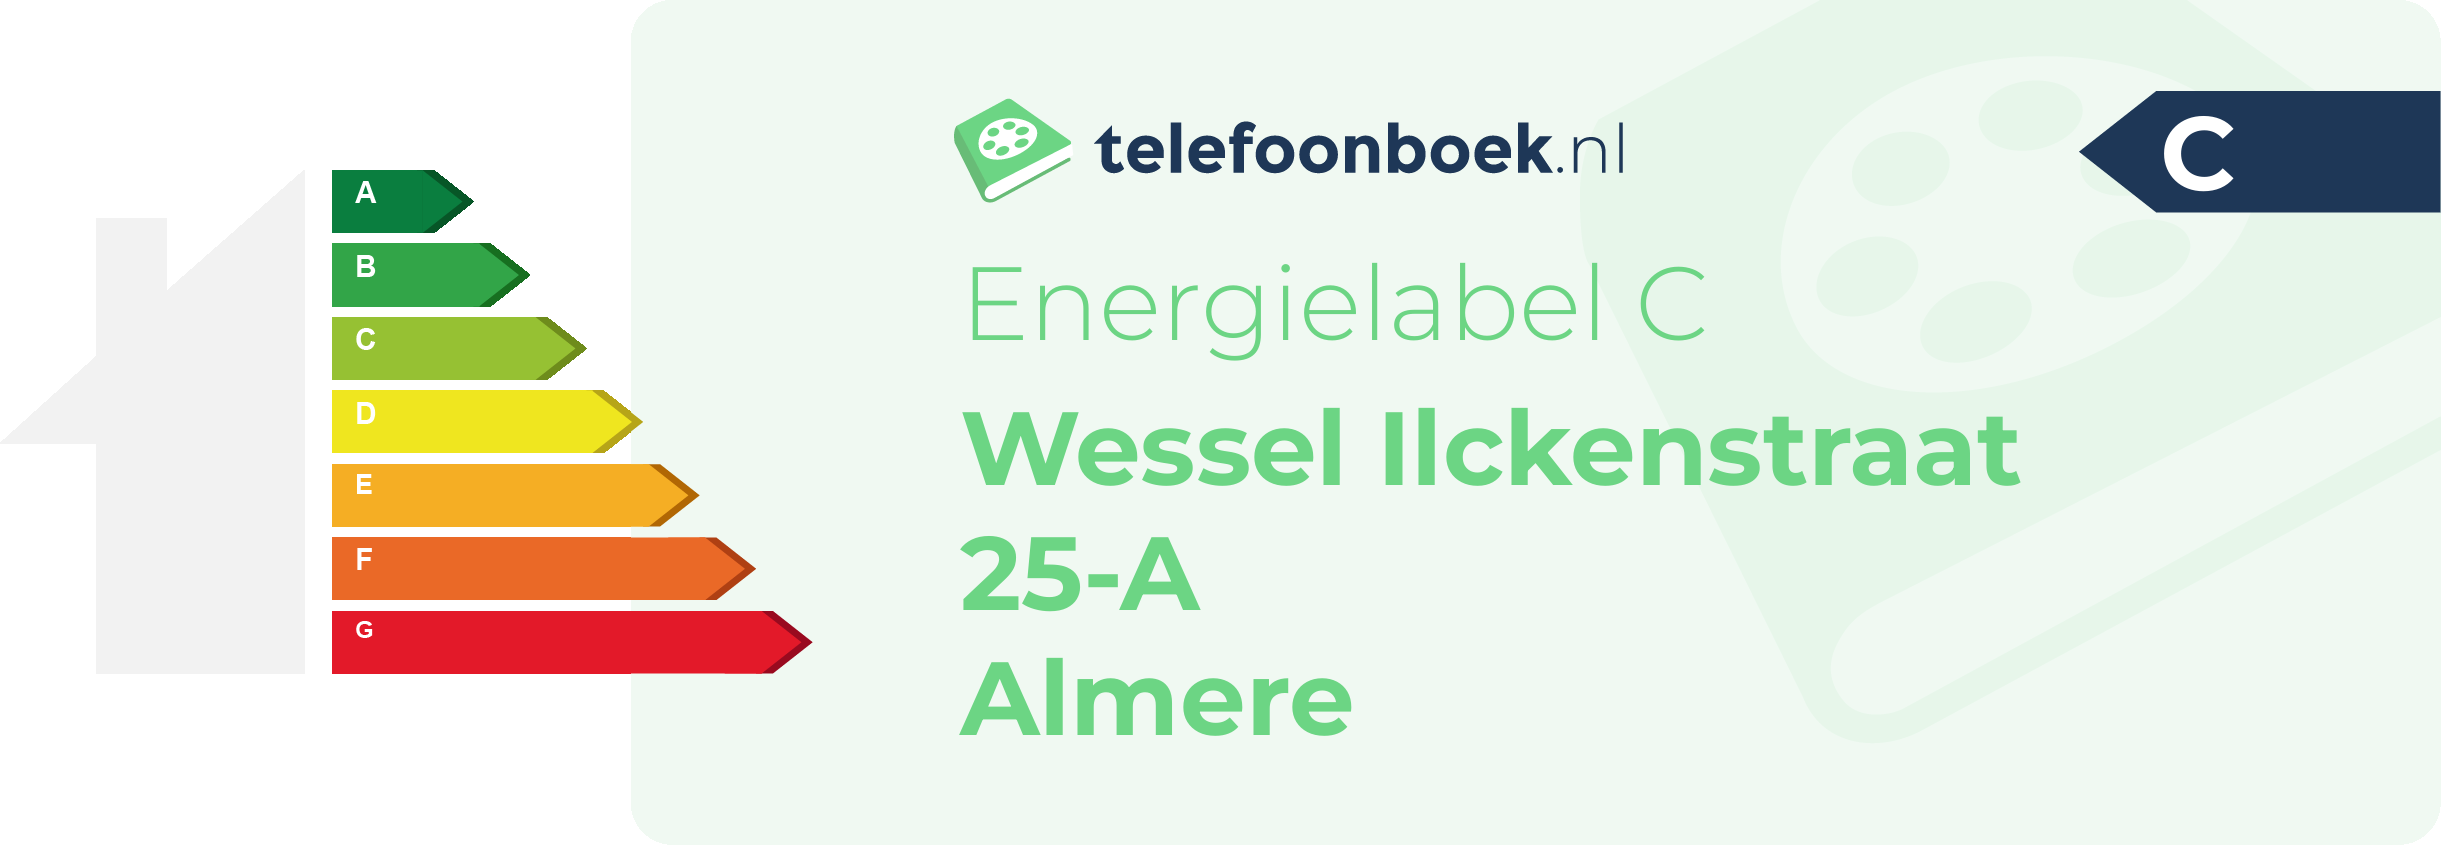 Energielabel Wessel Ilckenstraat 25-A Almere